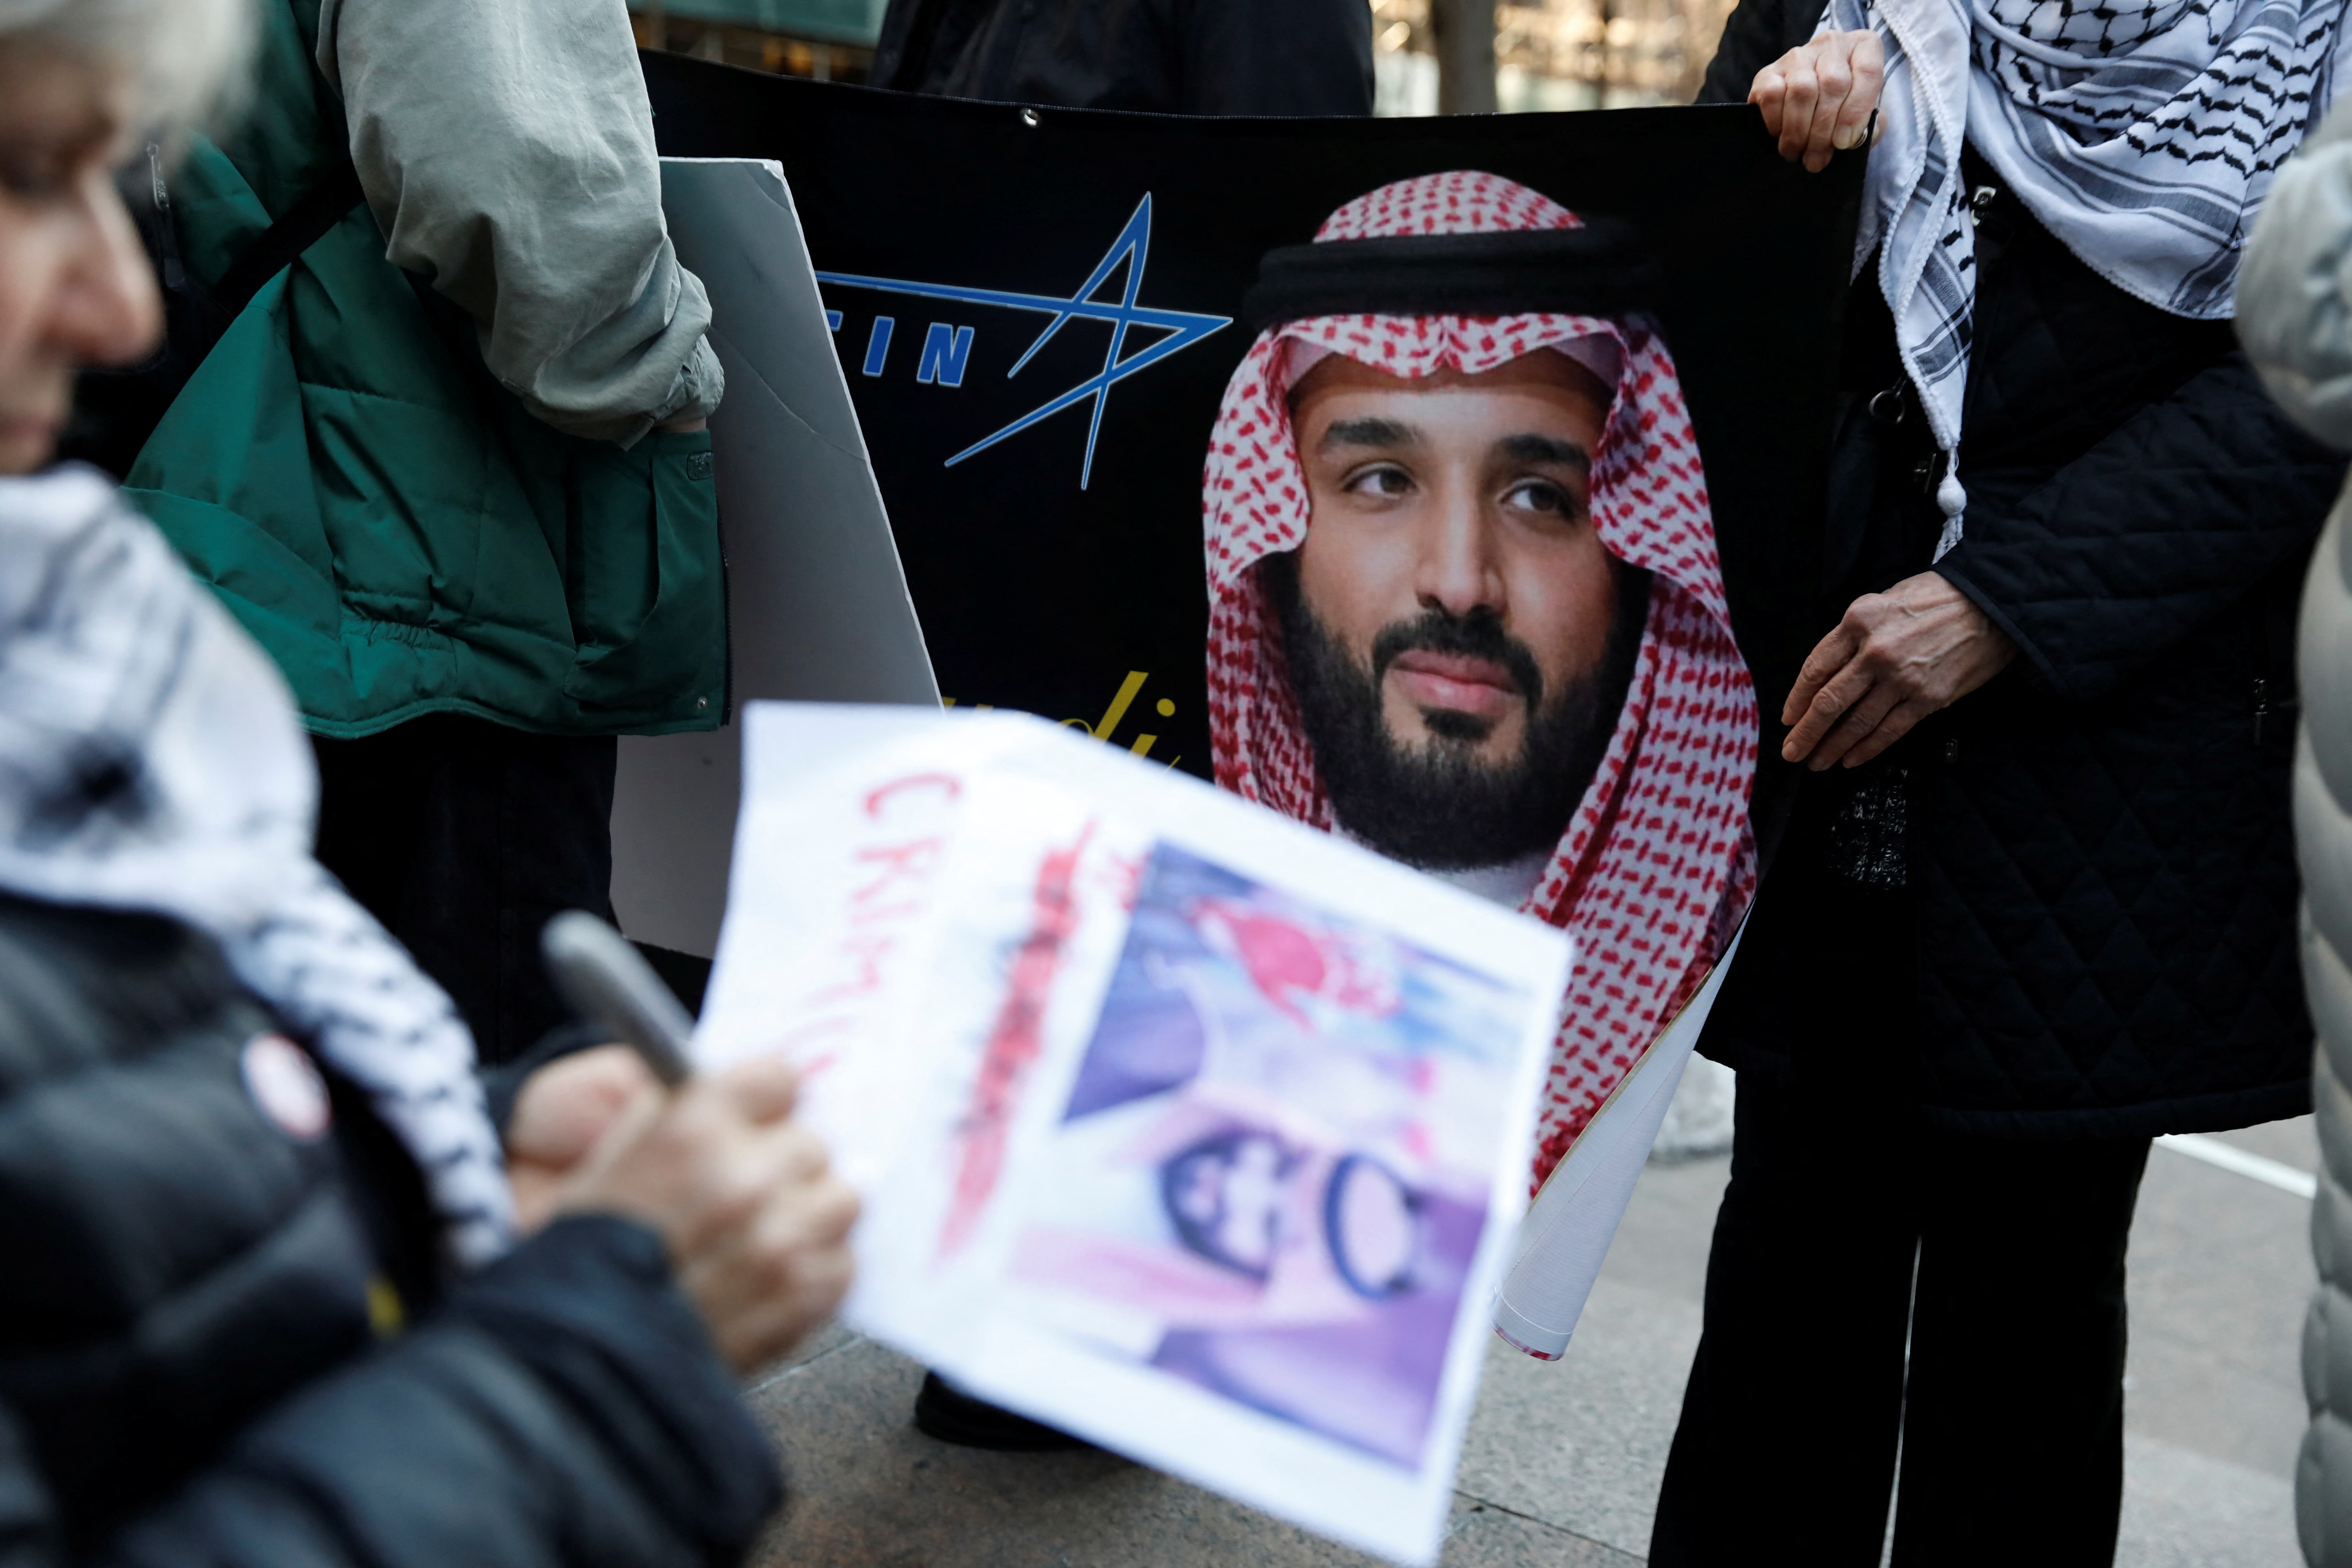 Demonstrators rally against the visit of Saudi Crown Prince Mohammed bin Salman with Wall Street executives in Manhattan